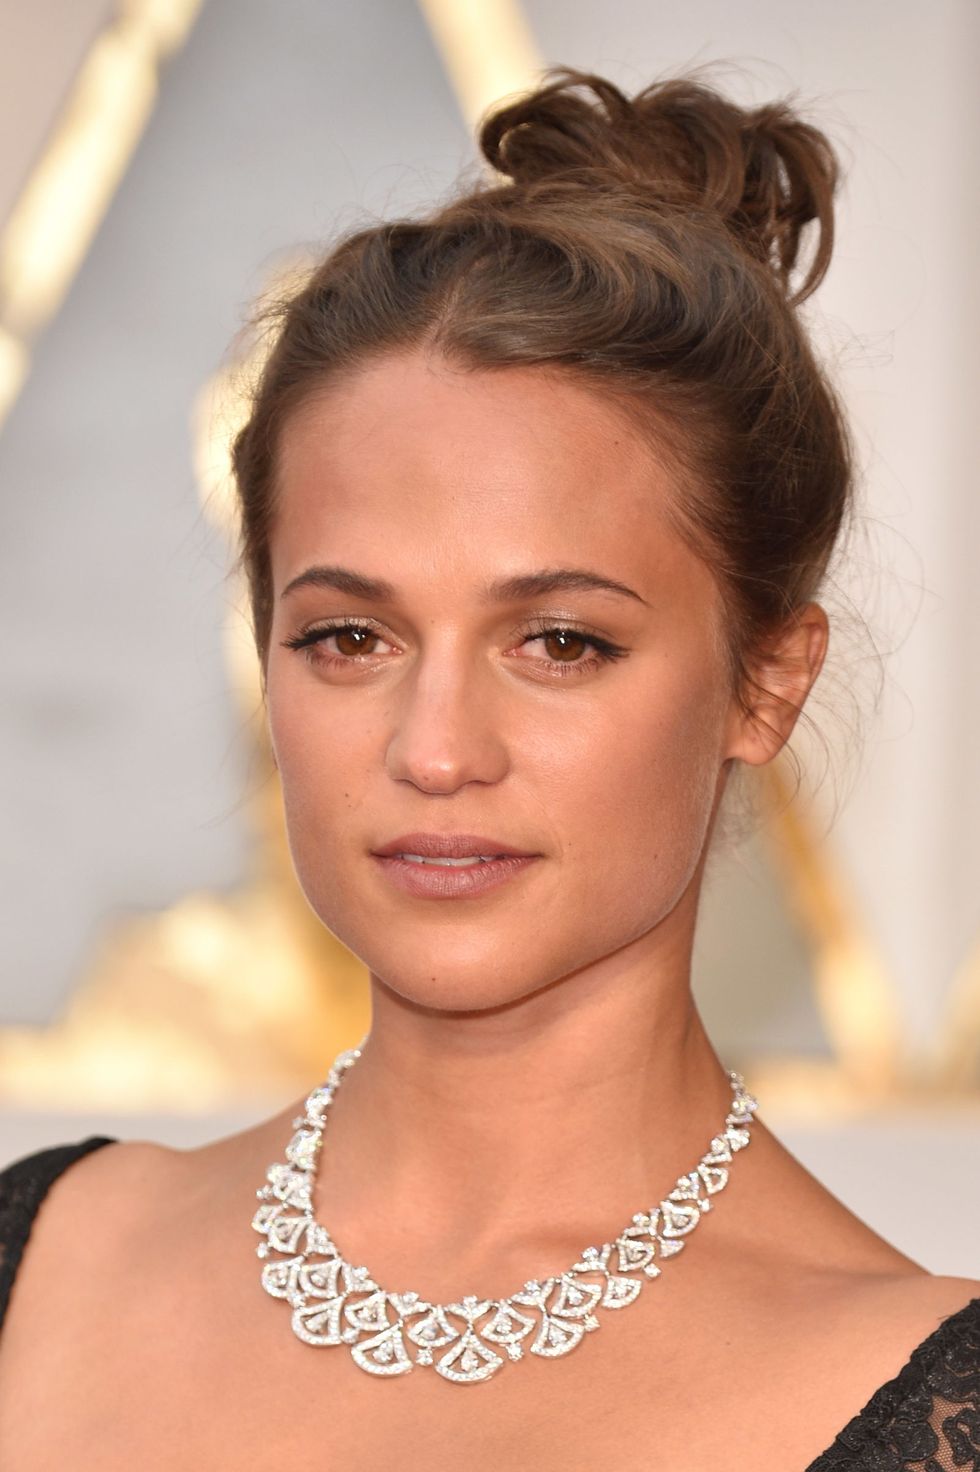 HOLLYWOOD, CA - FEBRUARY 26:  Actor Alicia Vikander attends the 89th Annual Academy Awards at Hollywood &amp; Highland Center on February 26, 2017 in Hollywood, California.  (Photo by Kevin Mazur/Getty Images)